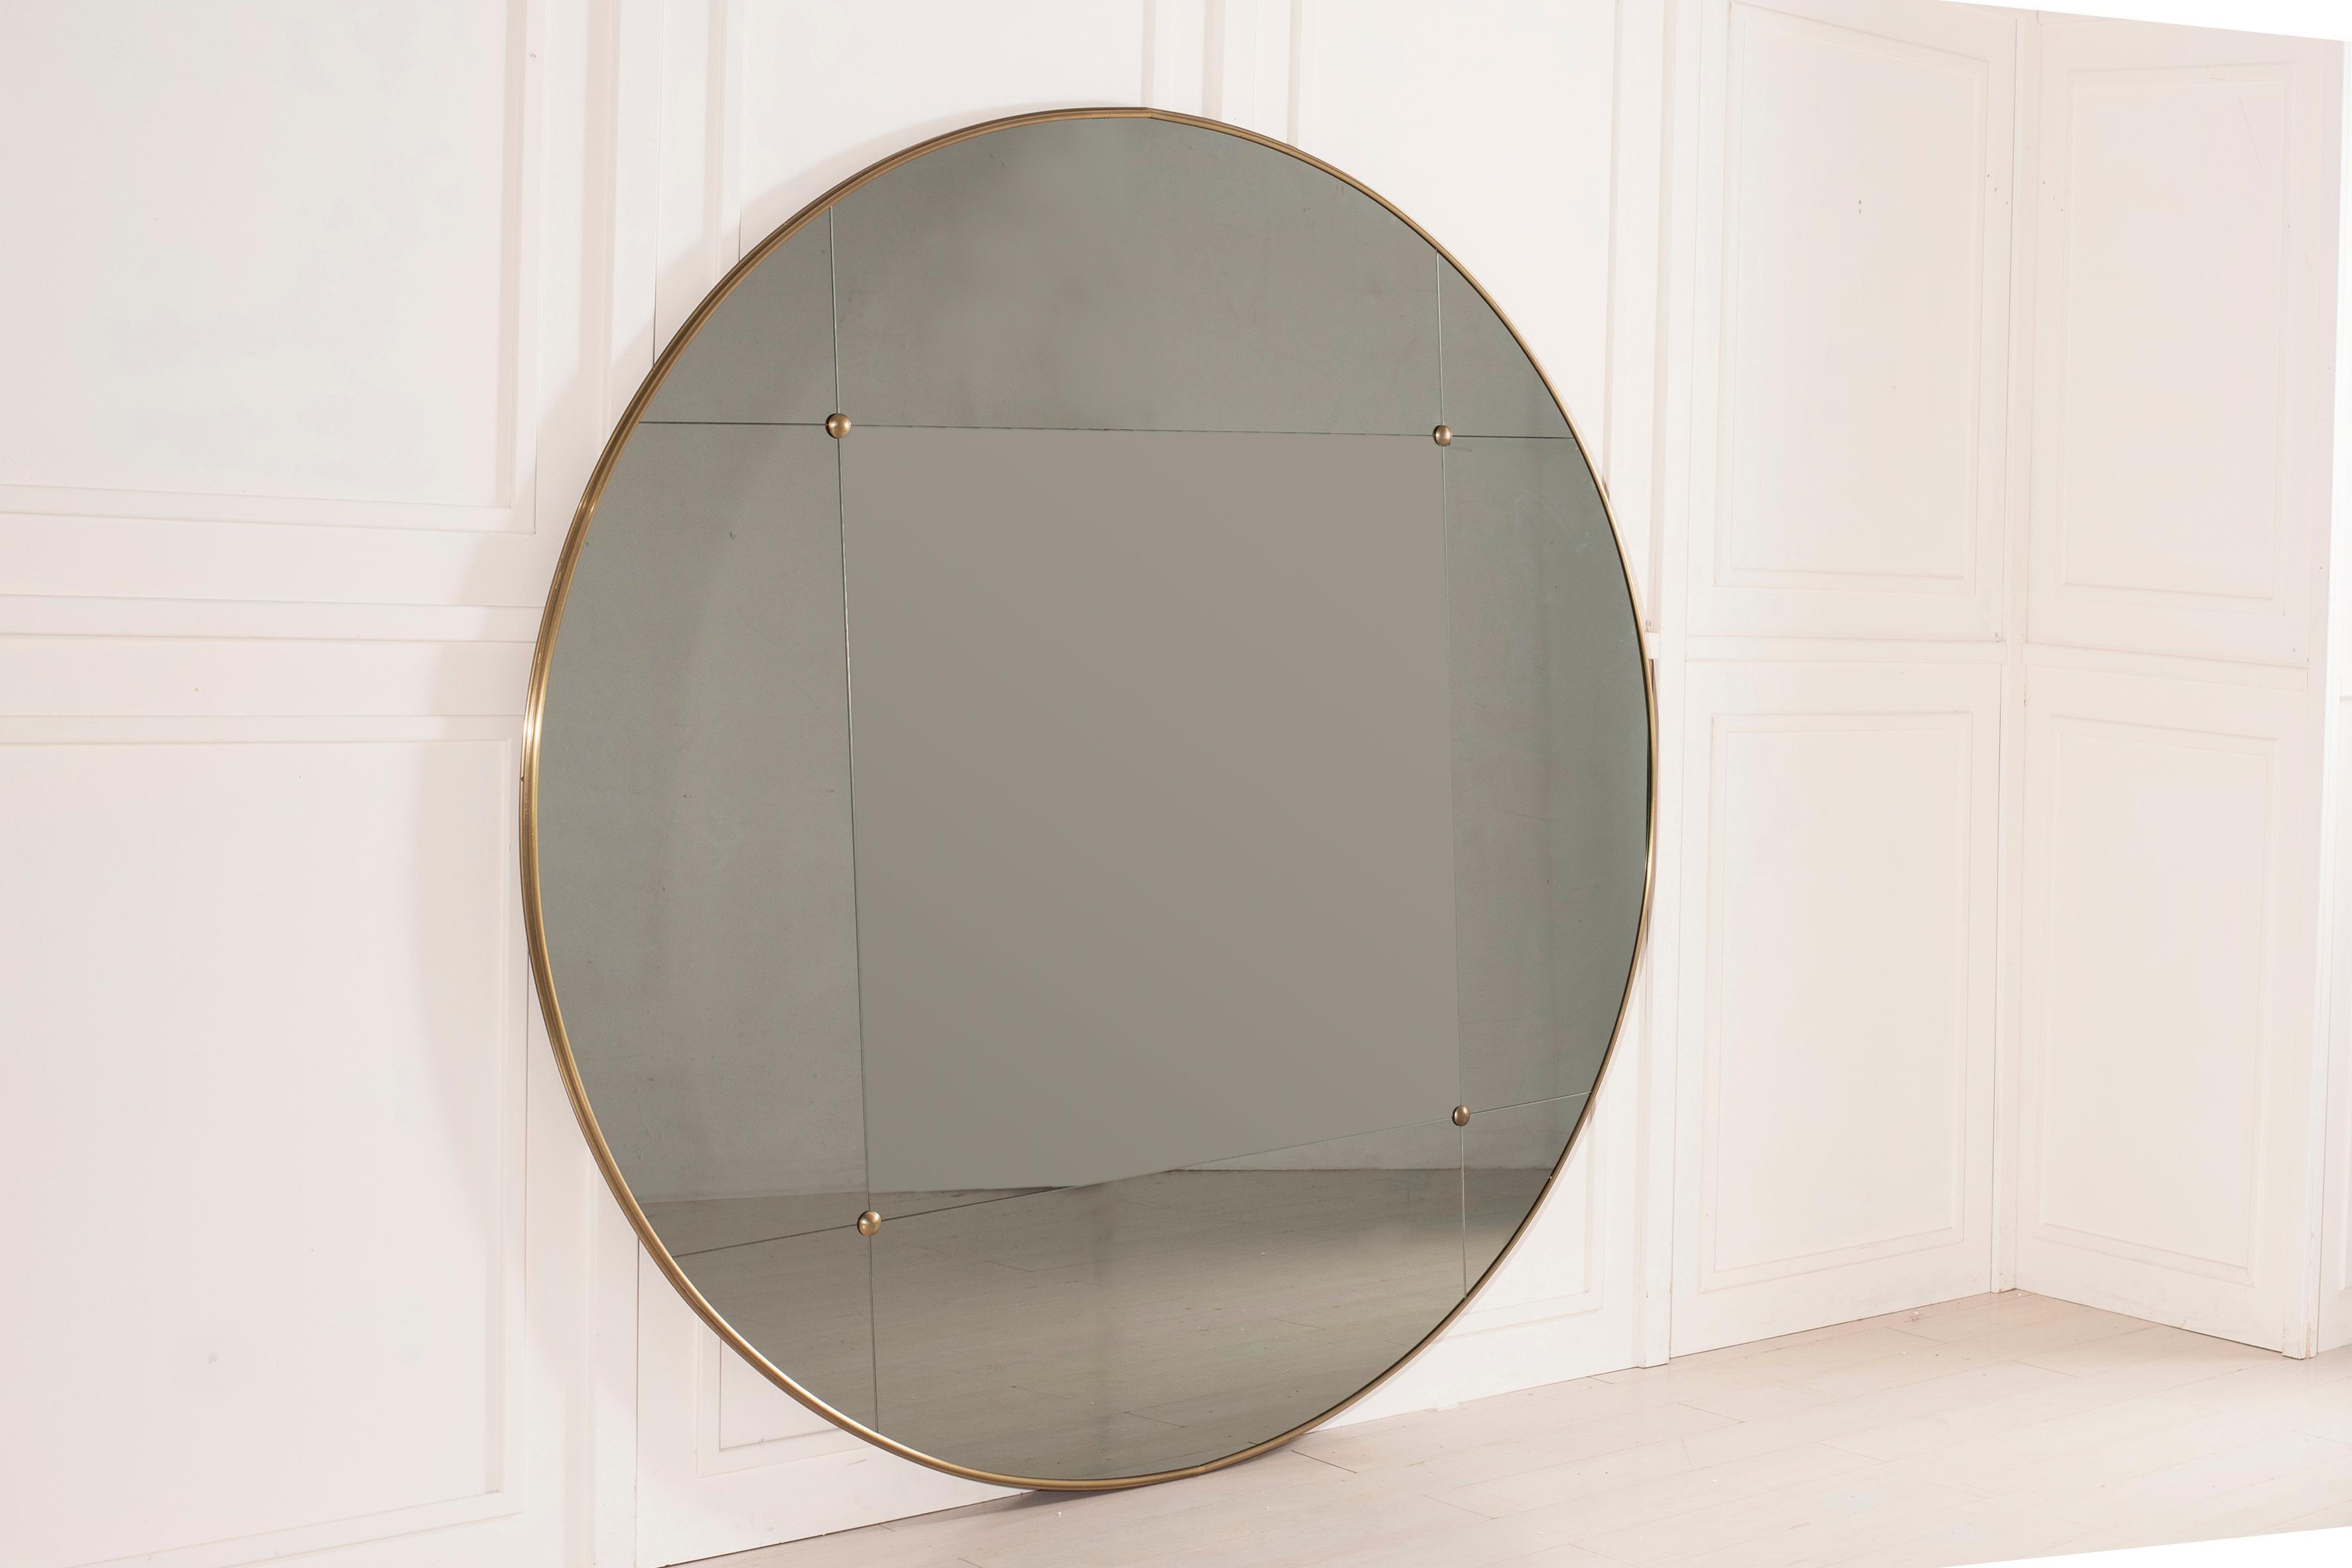 Pescetta presents its collection of contemporary customizable mirrors. With brass frame, window pane look and brass studs these mirrors replicate the idea of early 20th century Art Deco style mirrors. They suit both modern spaces which need a touch